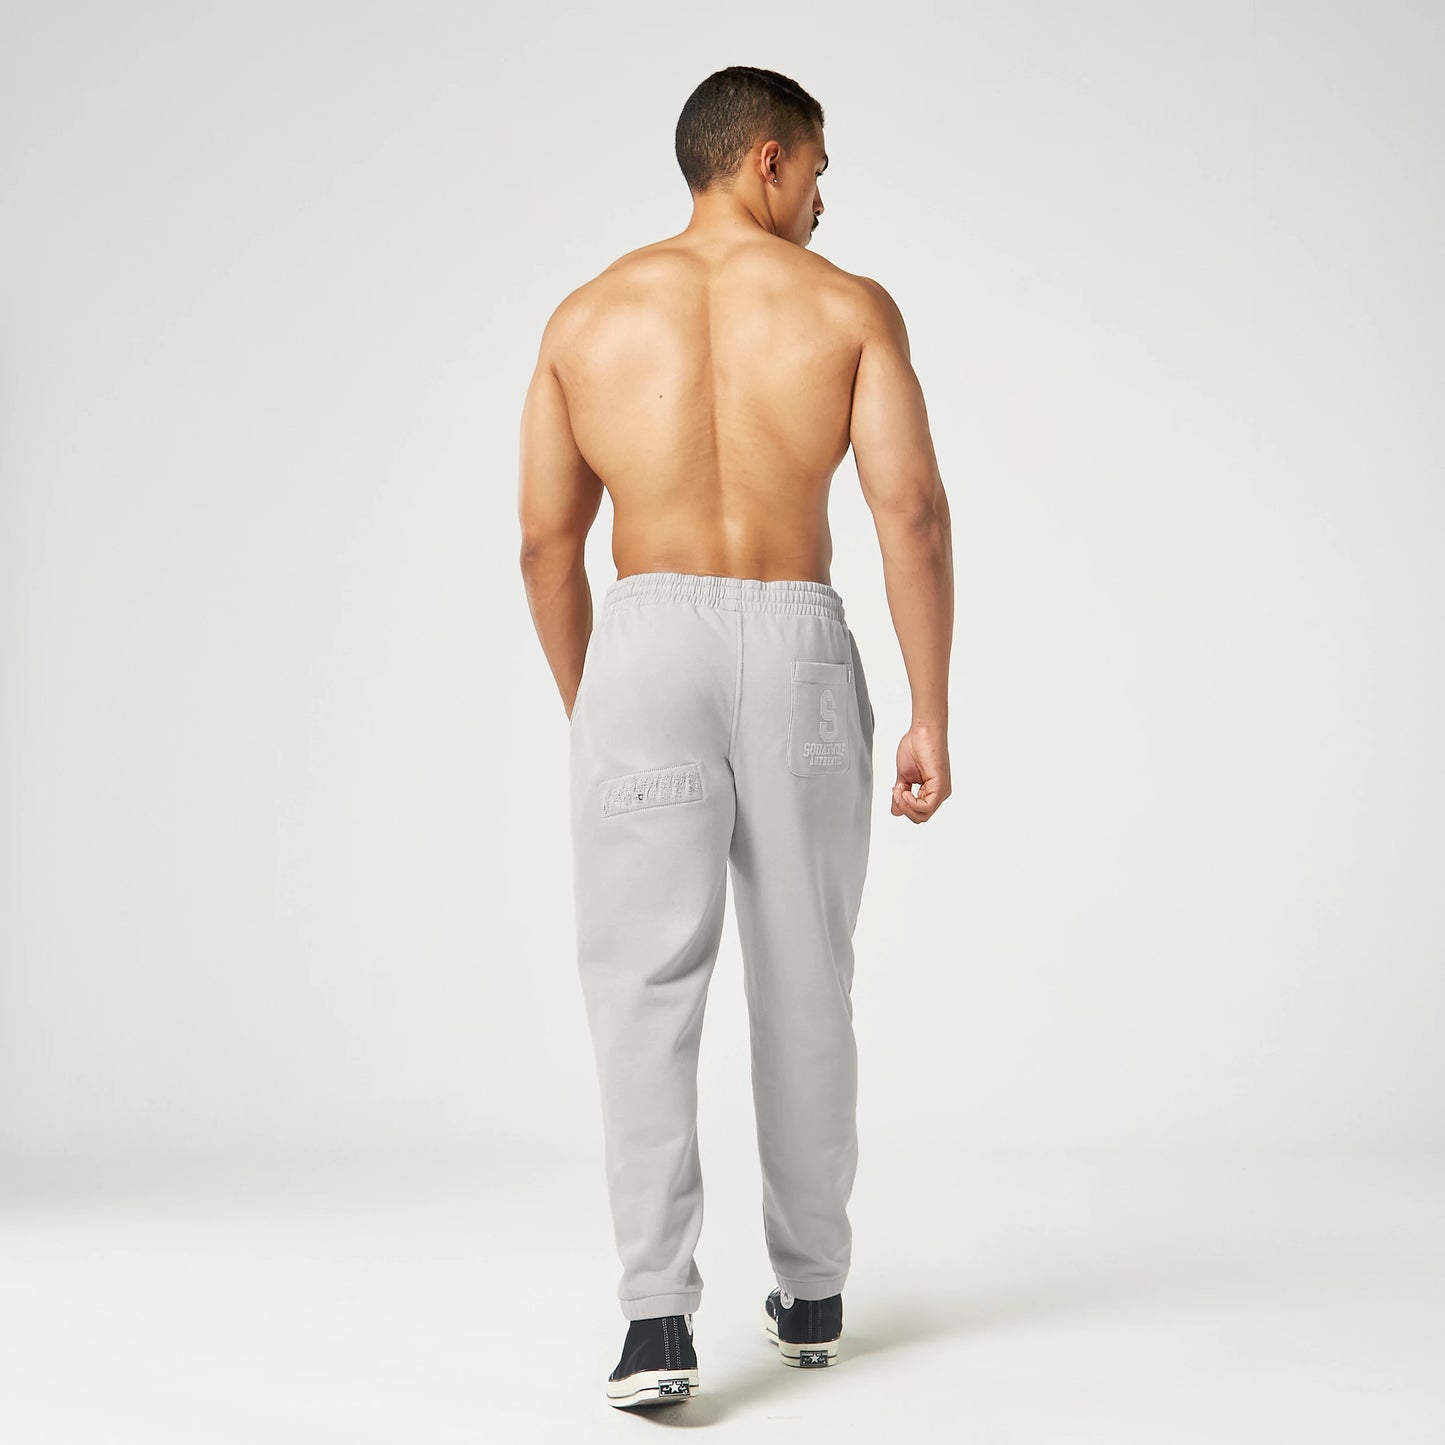 Golden Era Ripped and Repaired Joggers - Light Gray